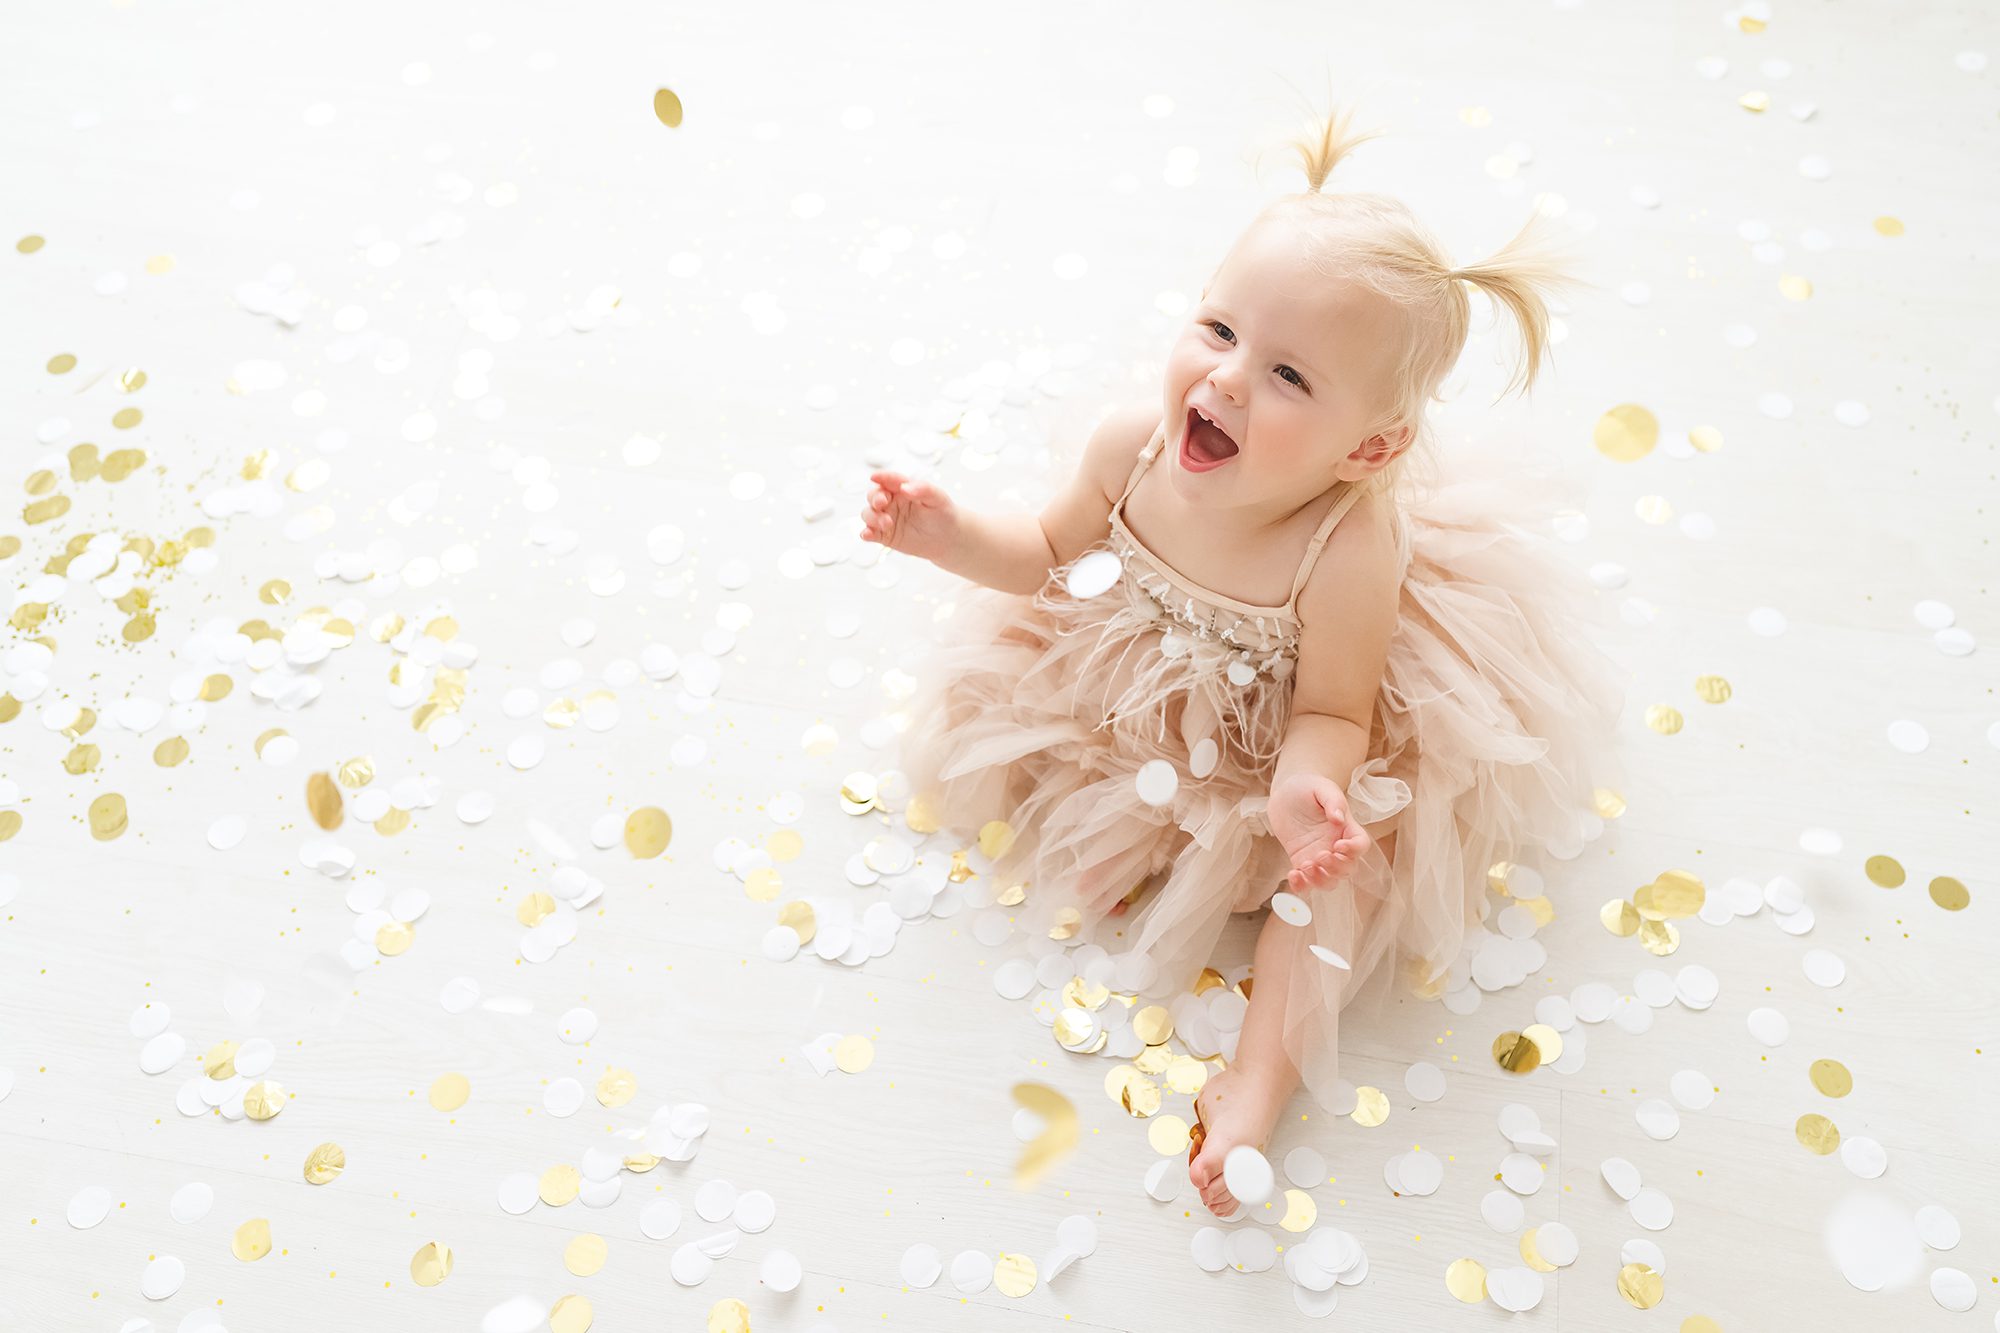 new years eve photoshoot ideas for kids.  Baby girl in blush pink dress with gold confetti smiling and laughing.